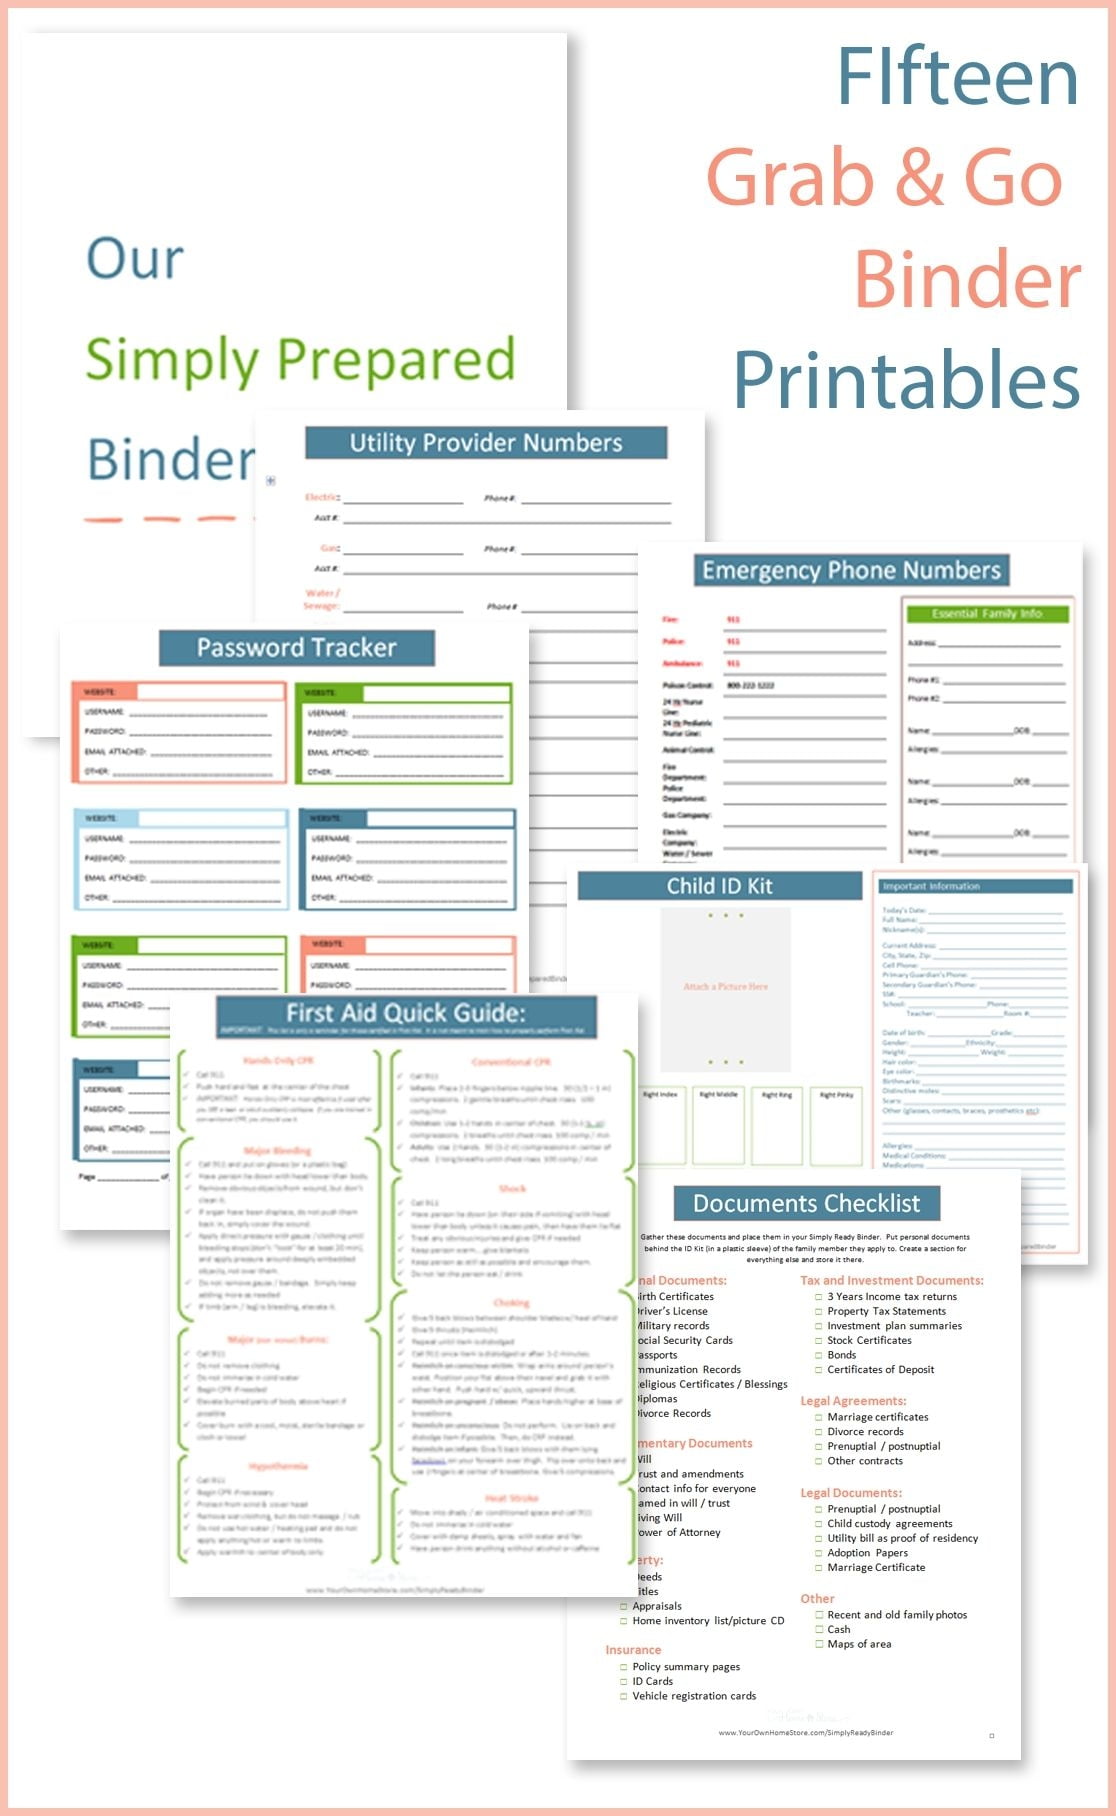 Fantastic Emergency Binder Printables With Very Complete Information Things I Hadnt Thoug Emergency Binder Printables Emergency Binder Family Emergency Binder